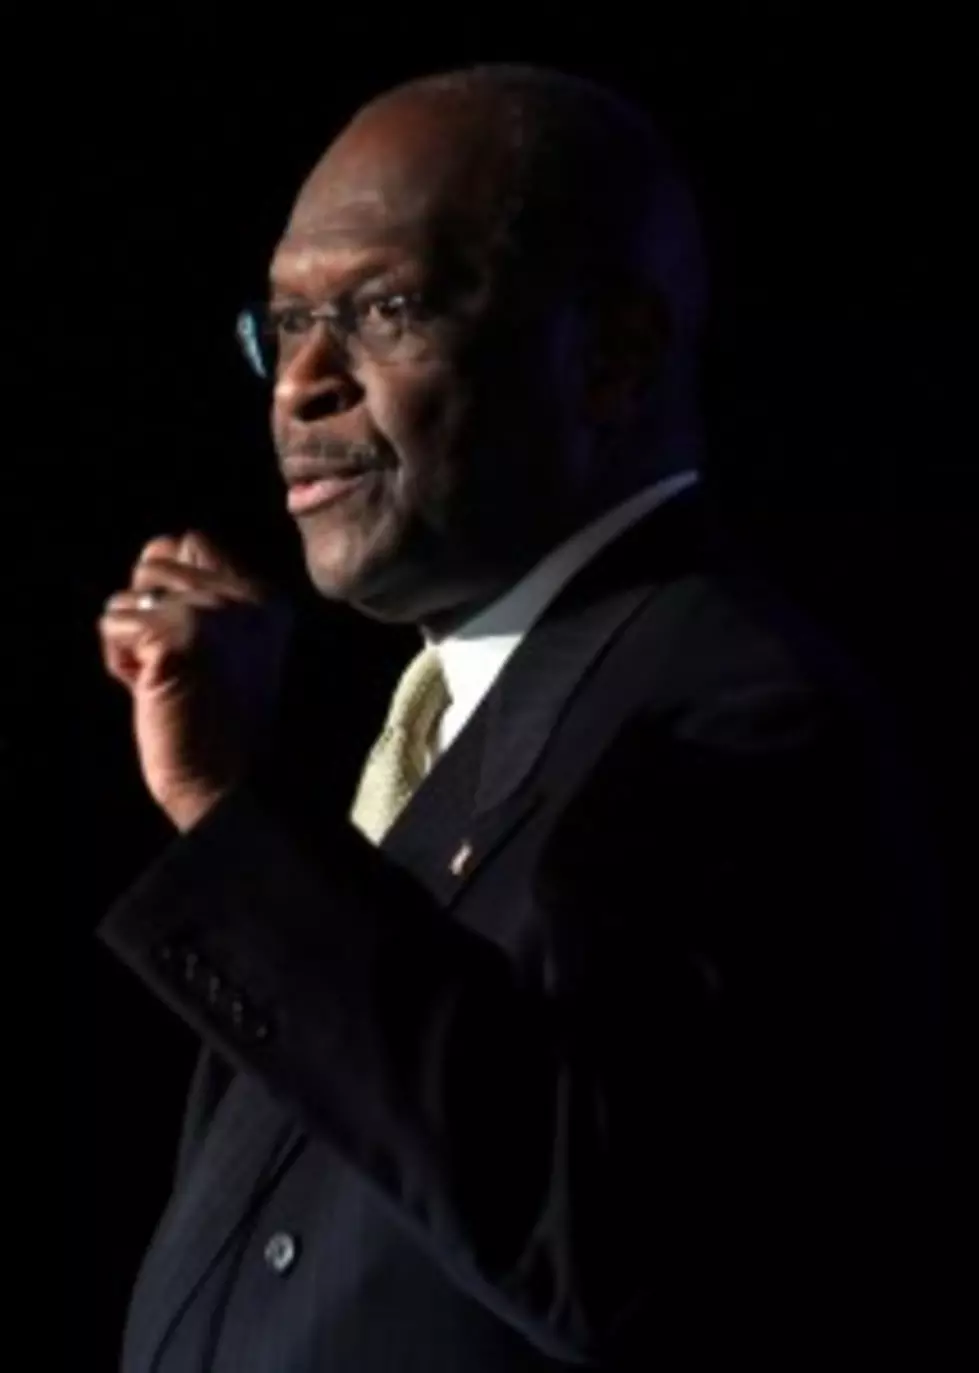 Cain Assault Continues&#8211;63 Stories in 4 Days..And Counting